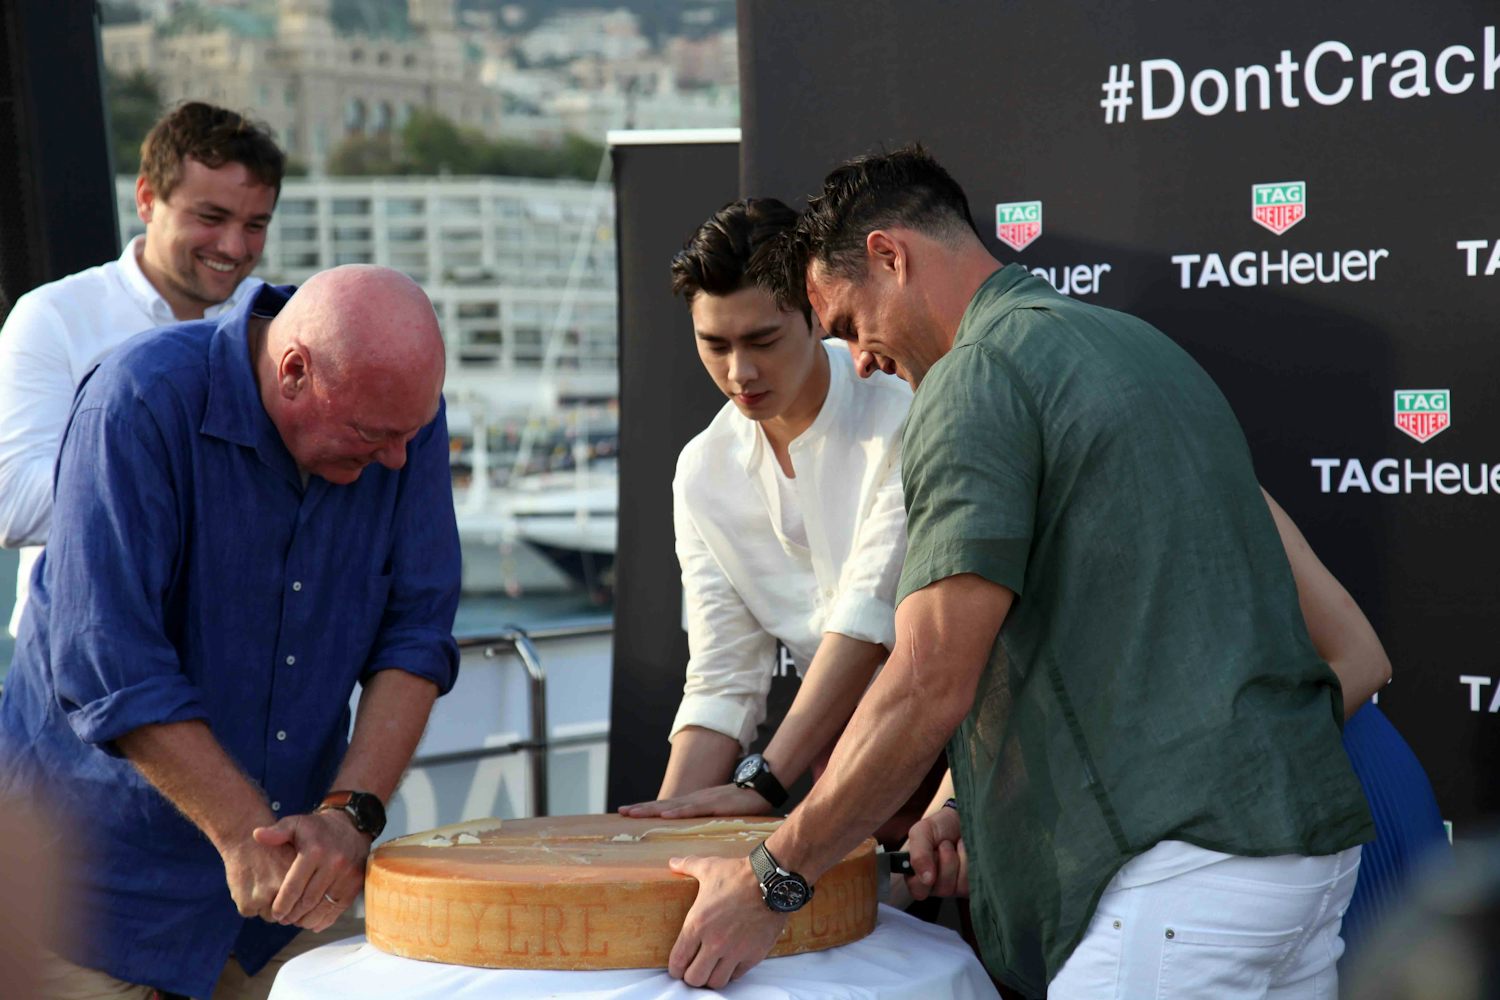 Jean-Claude Biver receives some help from New Zealand rugby legend Dan Carter, and Chinese actor Li Yi Feng.